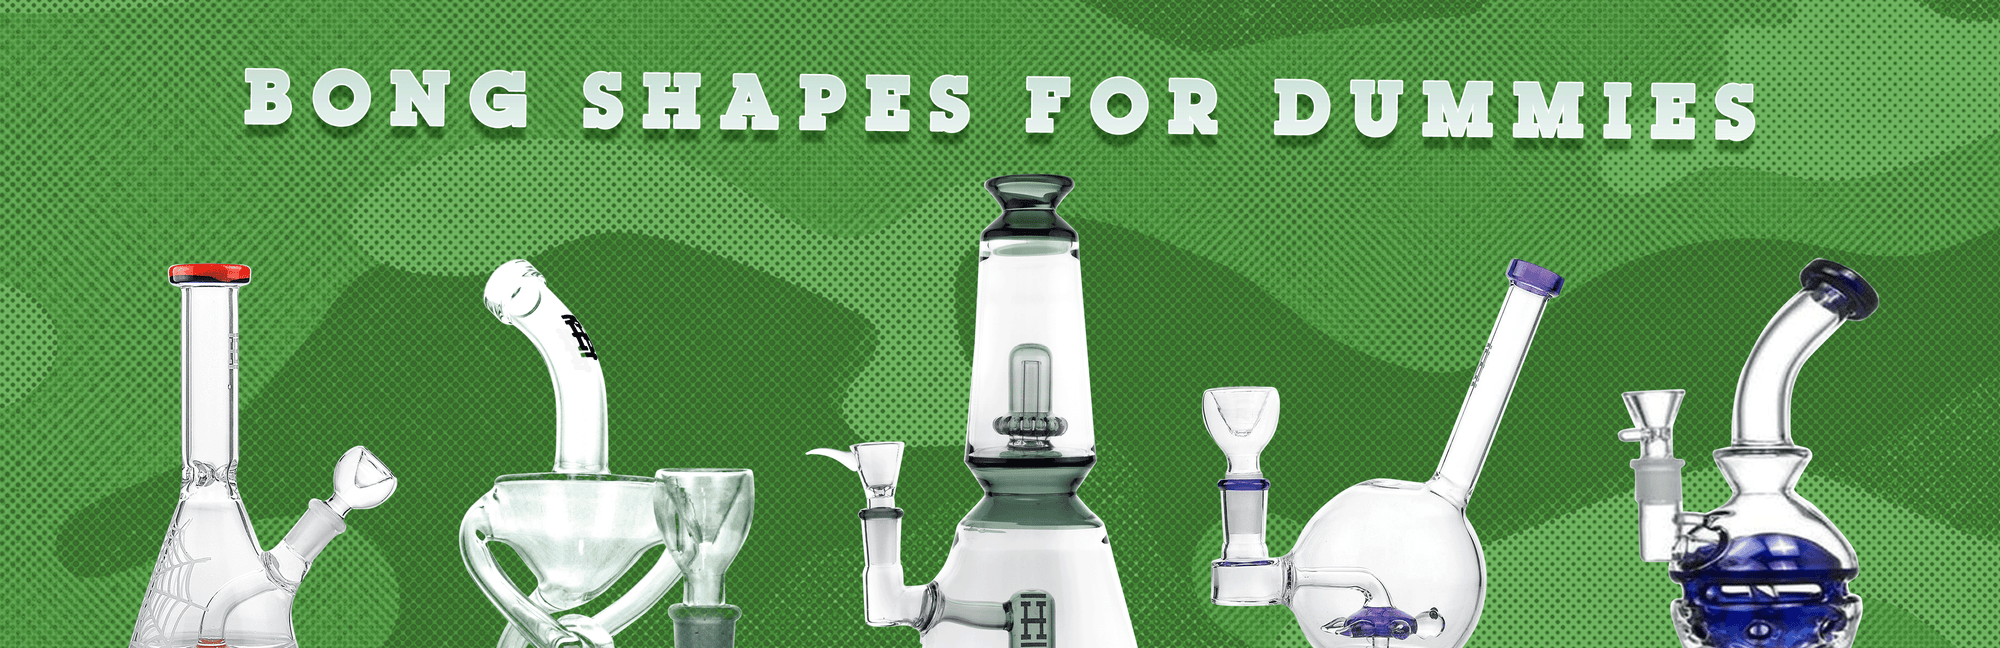 bong-shapes-for-dummies